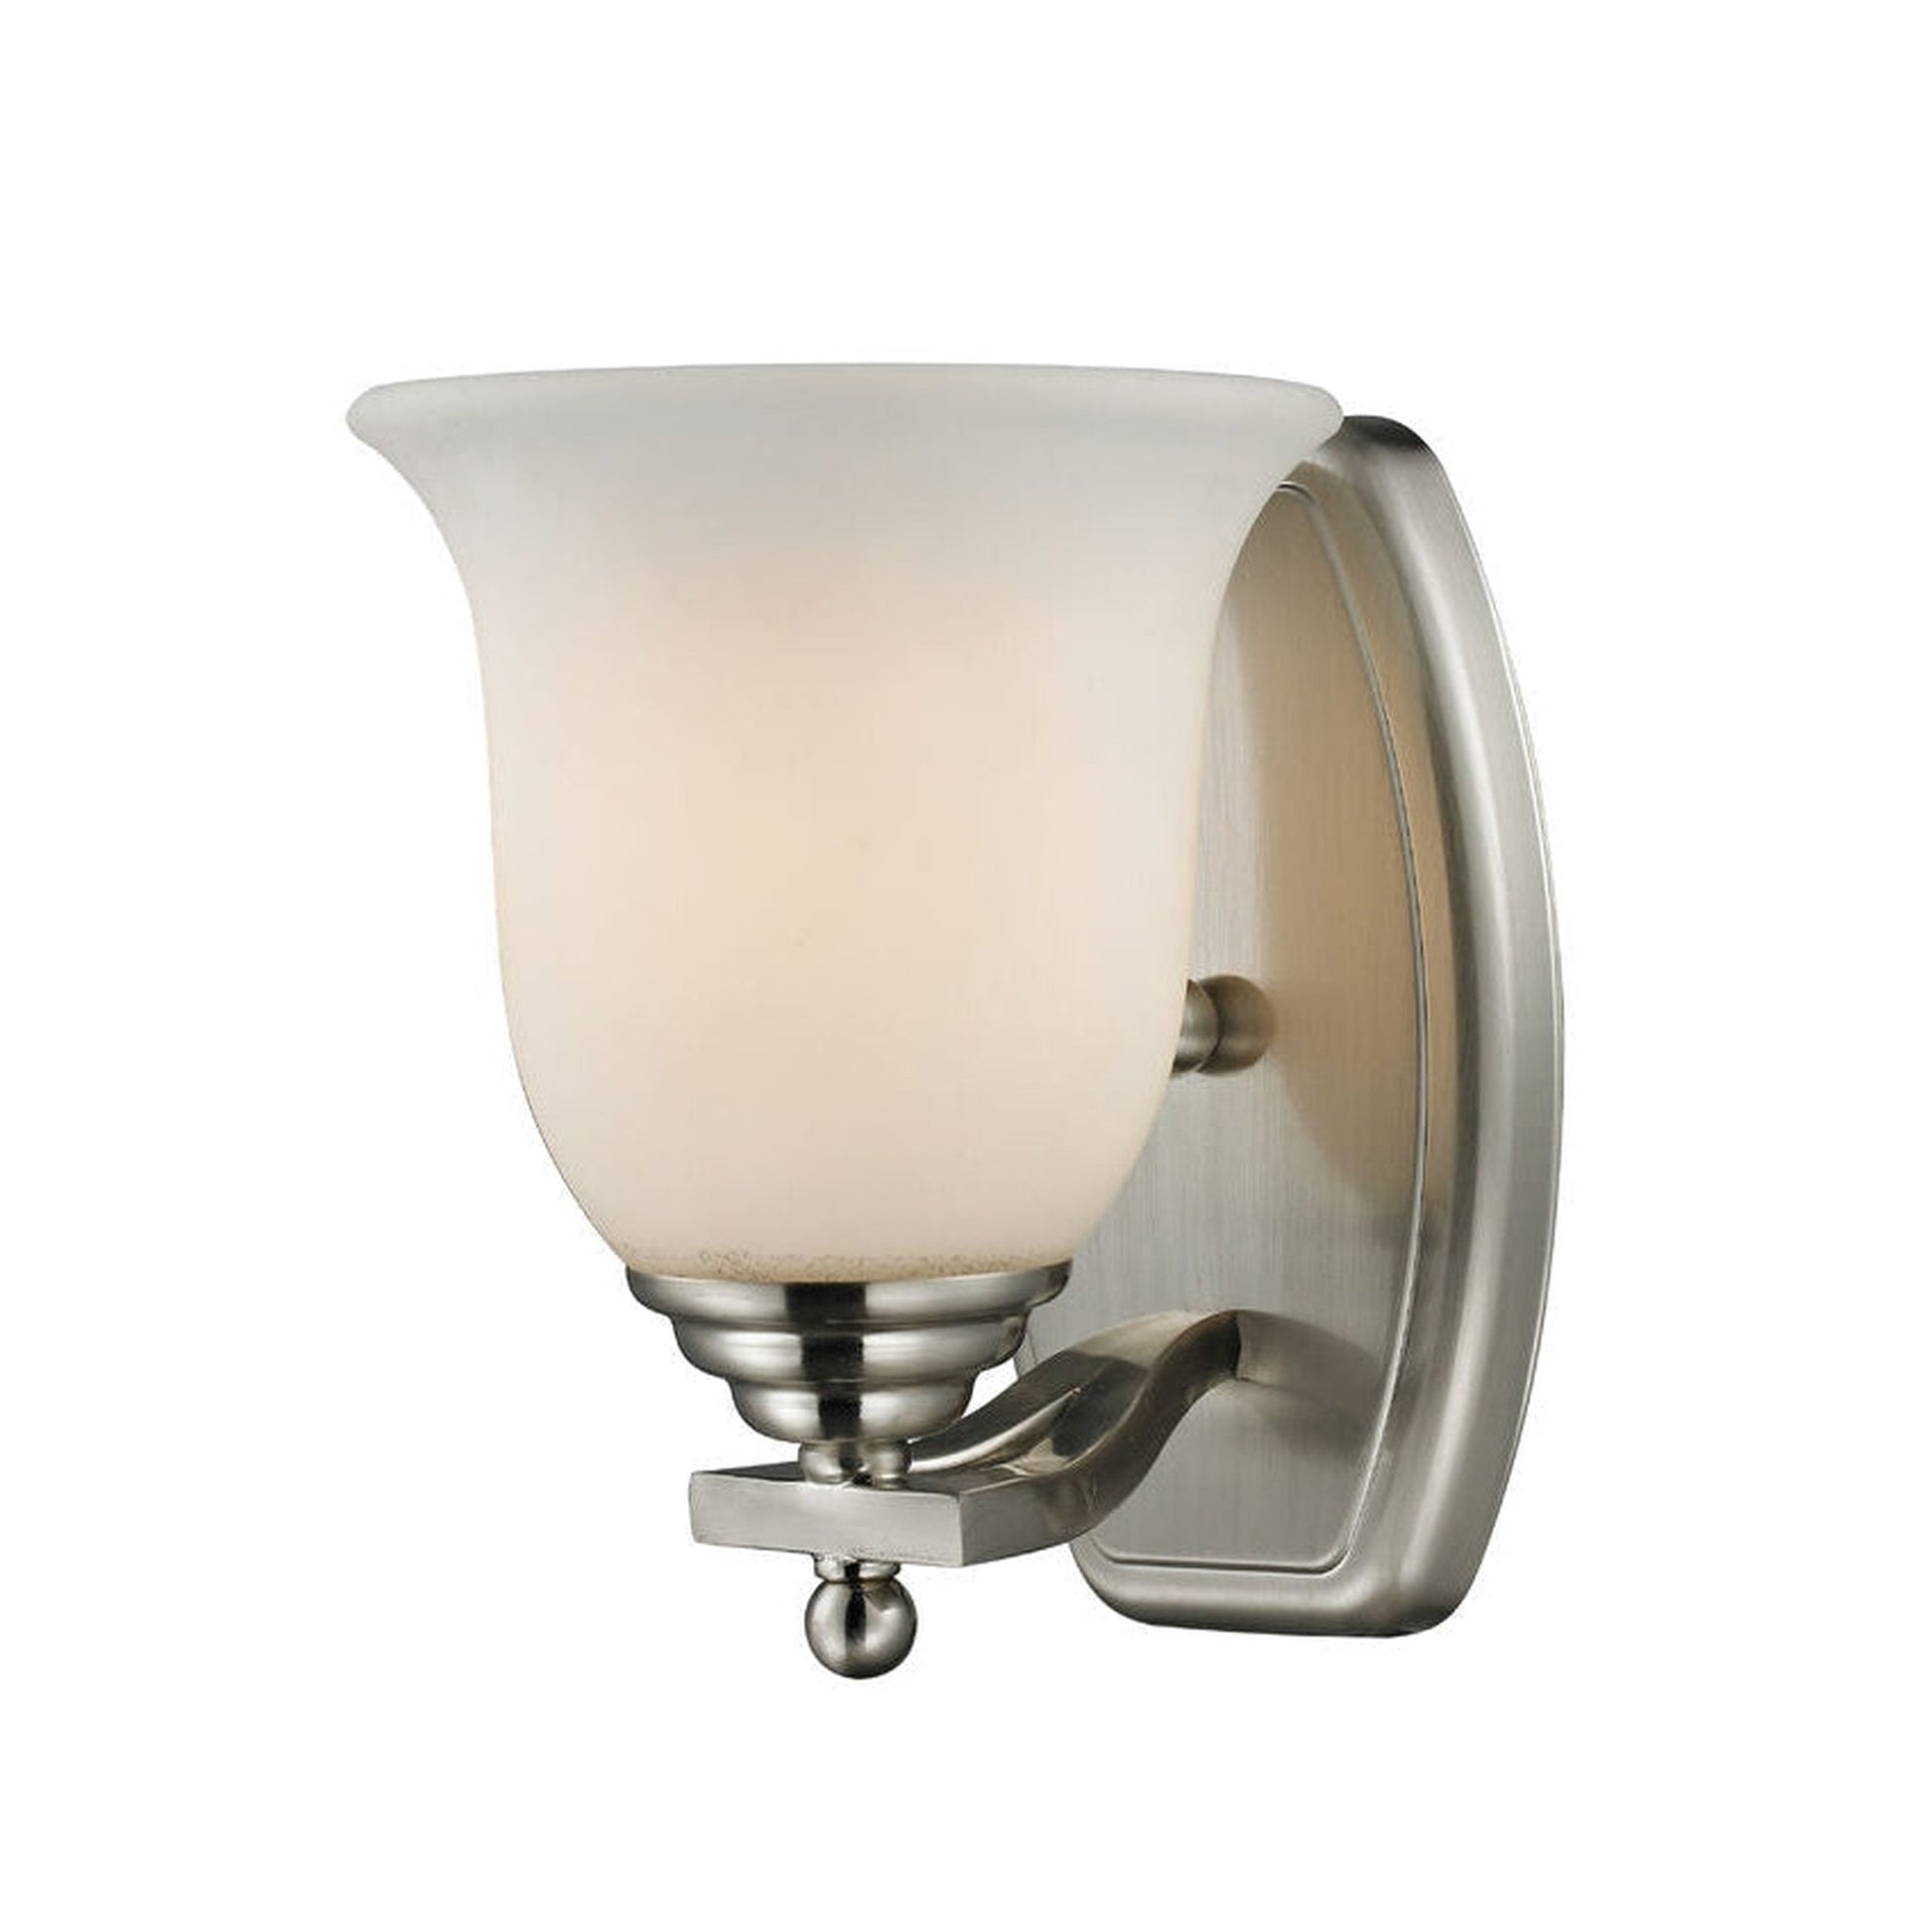 Z-Lite Lagoon 6" 1-Light Brushed Nickel Vanity Light With Matte Opal Glass Shade